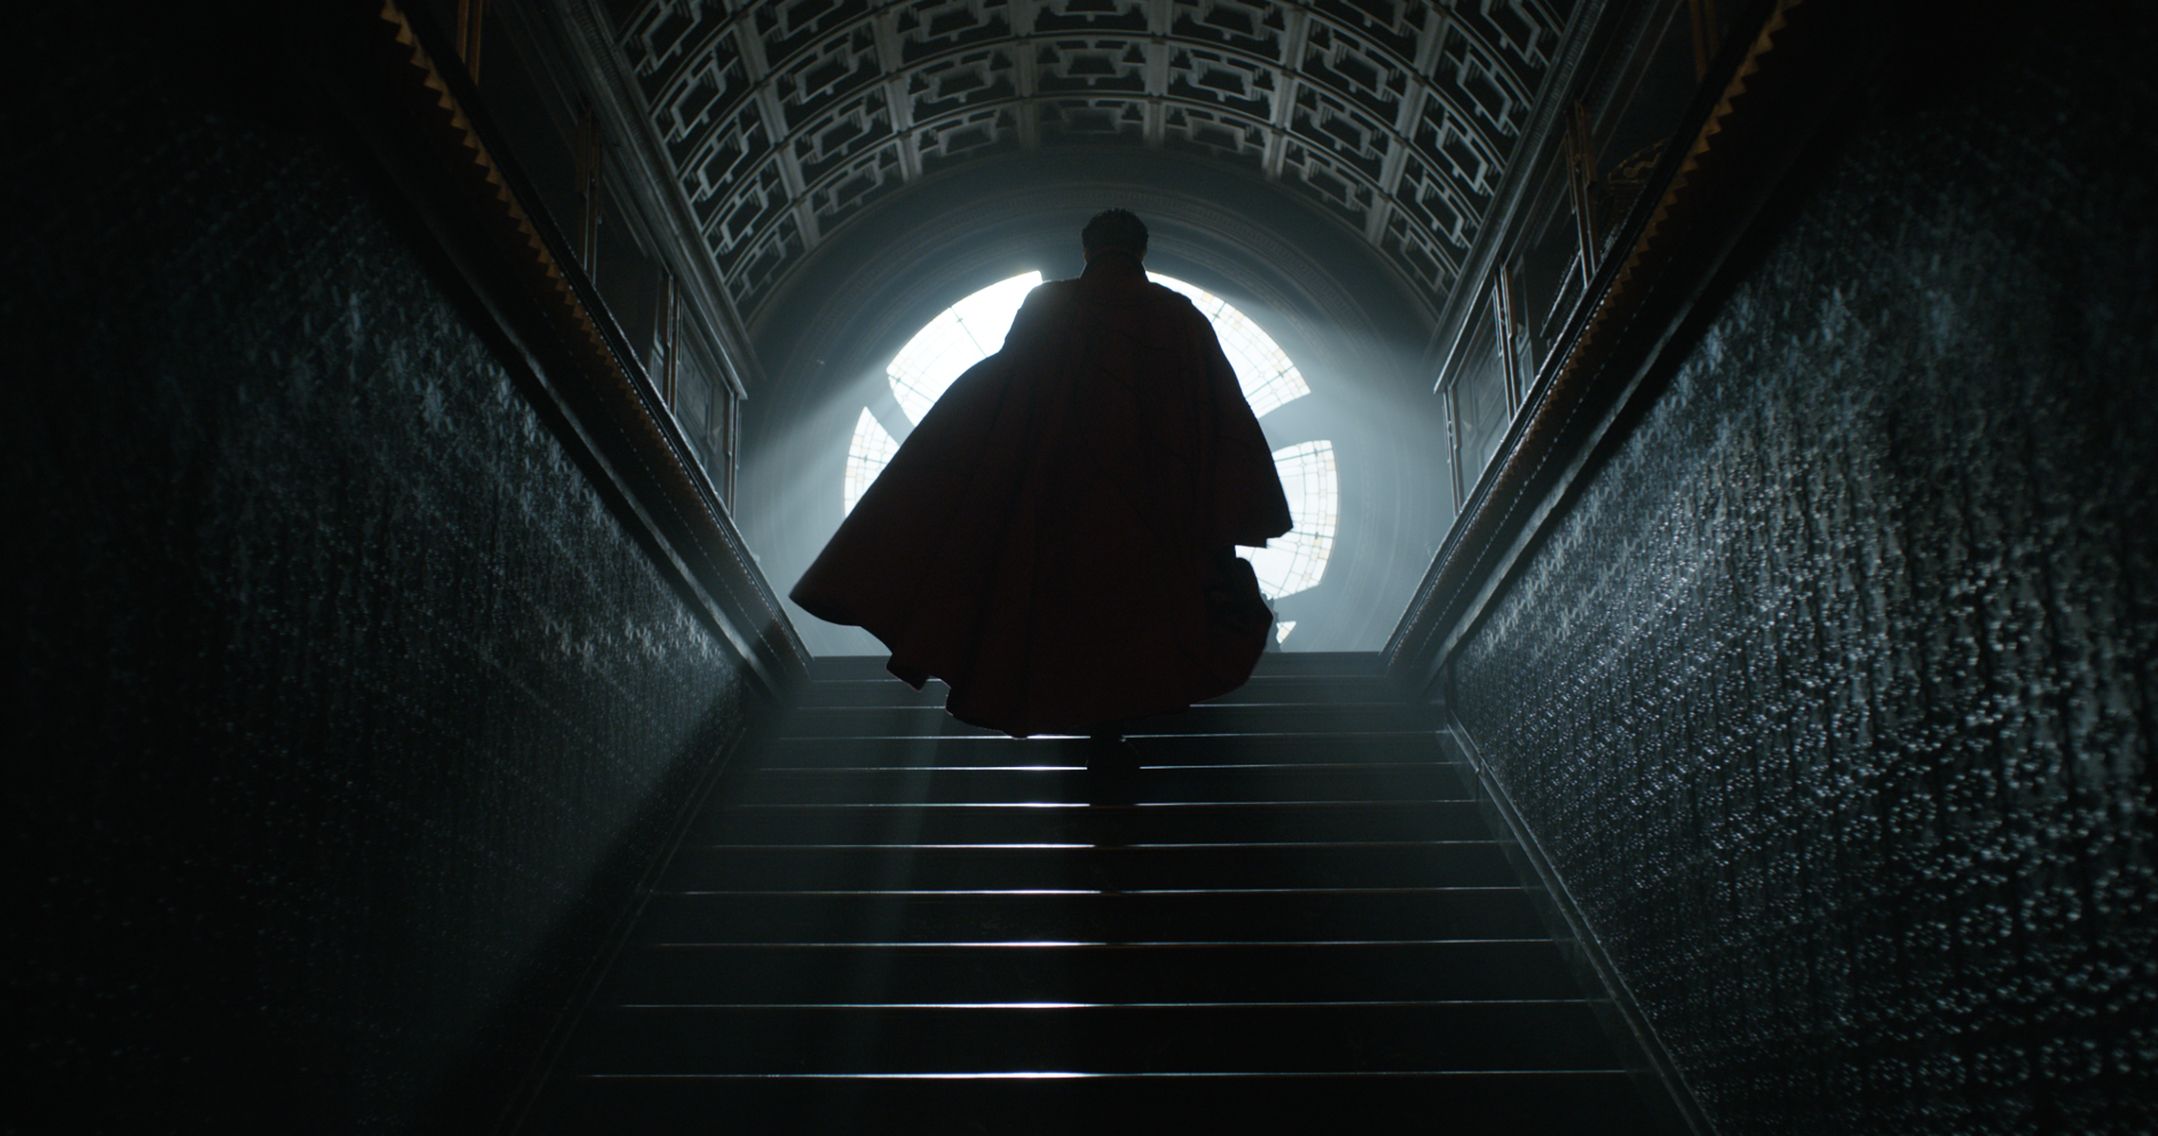 Doctor Strange Kevin Feige On Marvel S New Headlining Hero Collider Images, Photos, Reviews